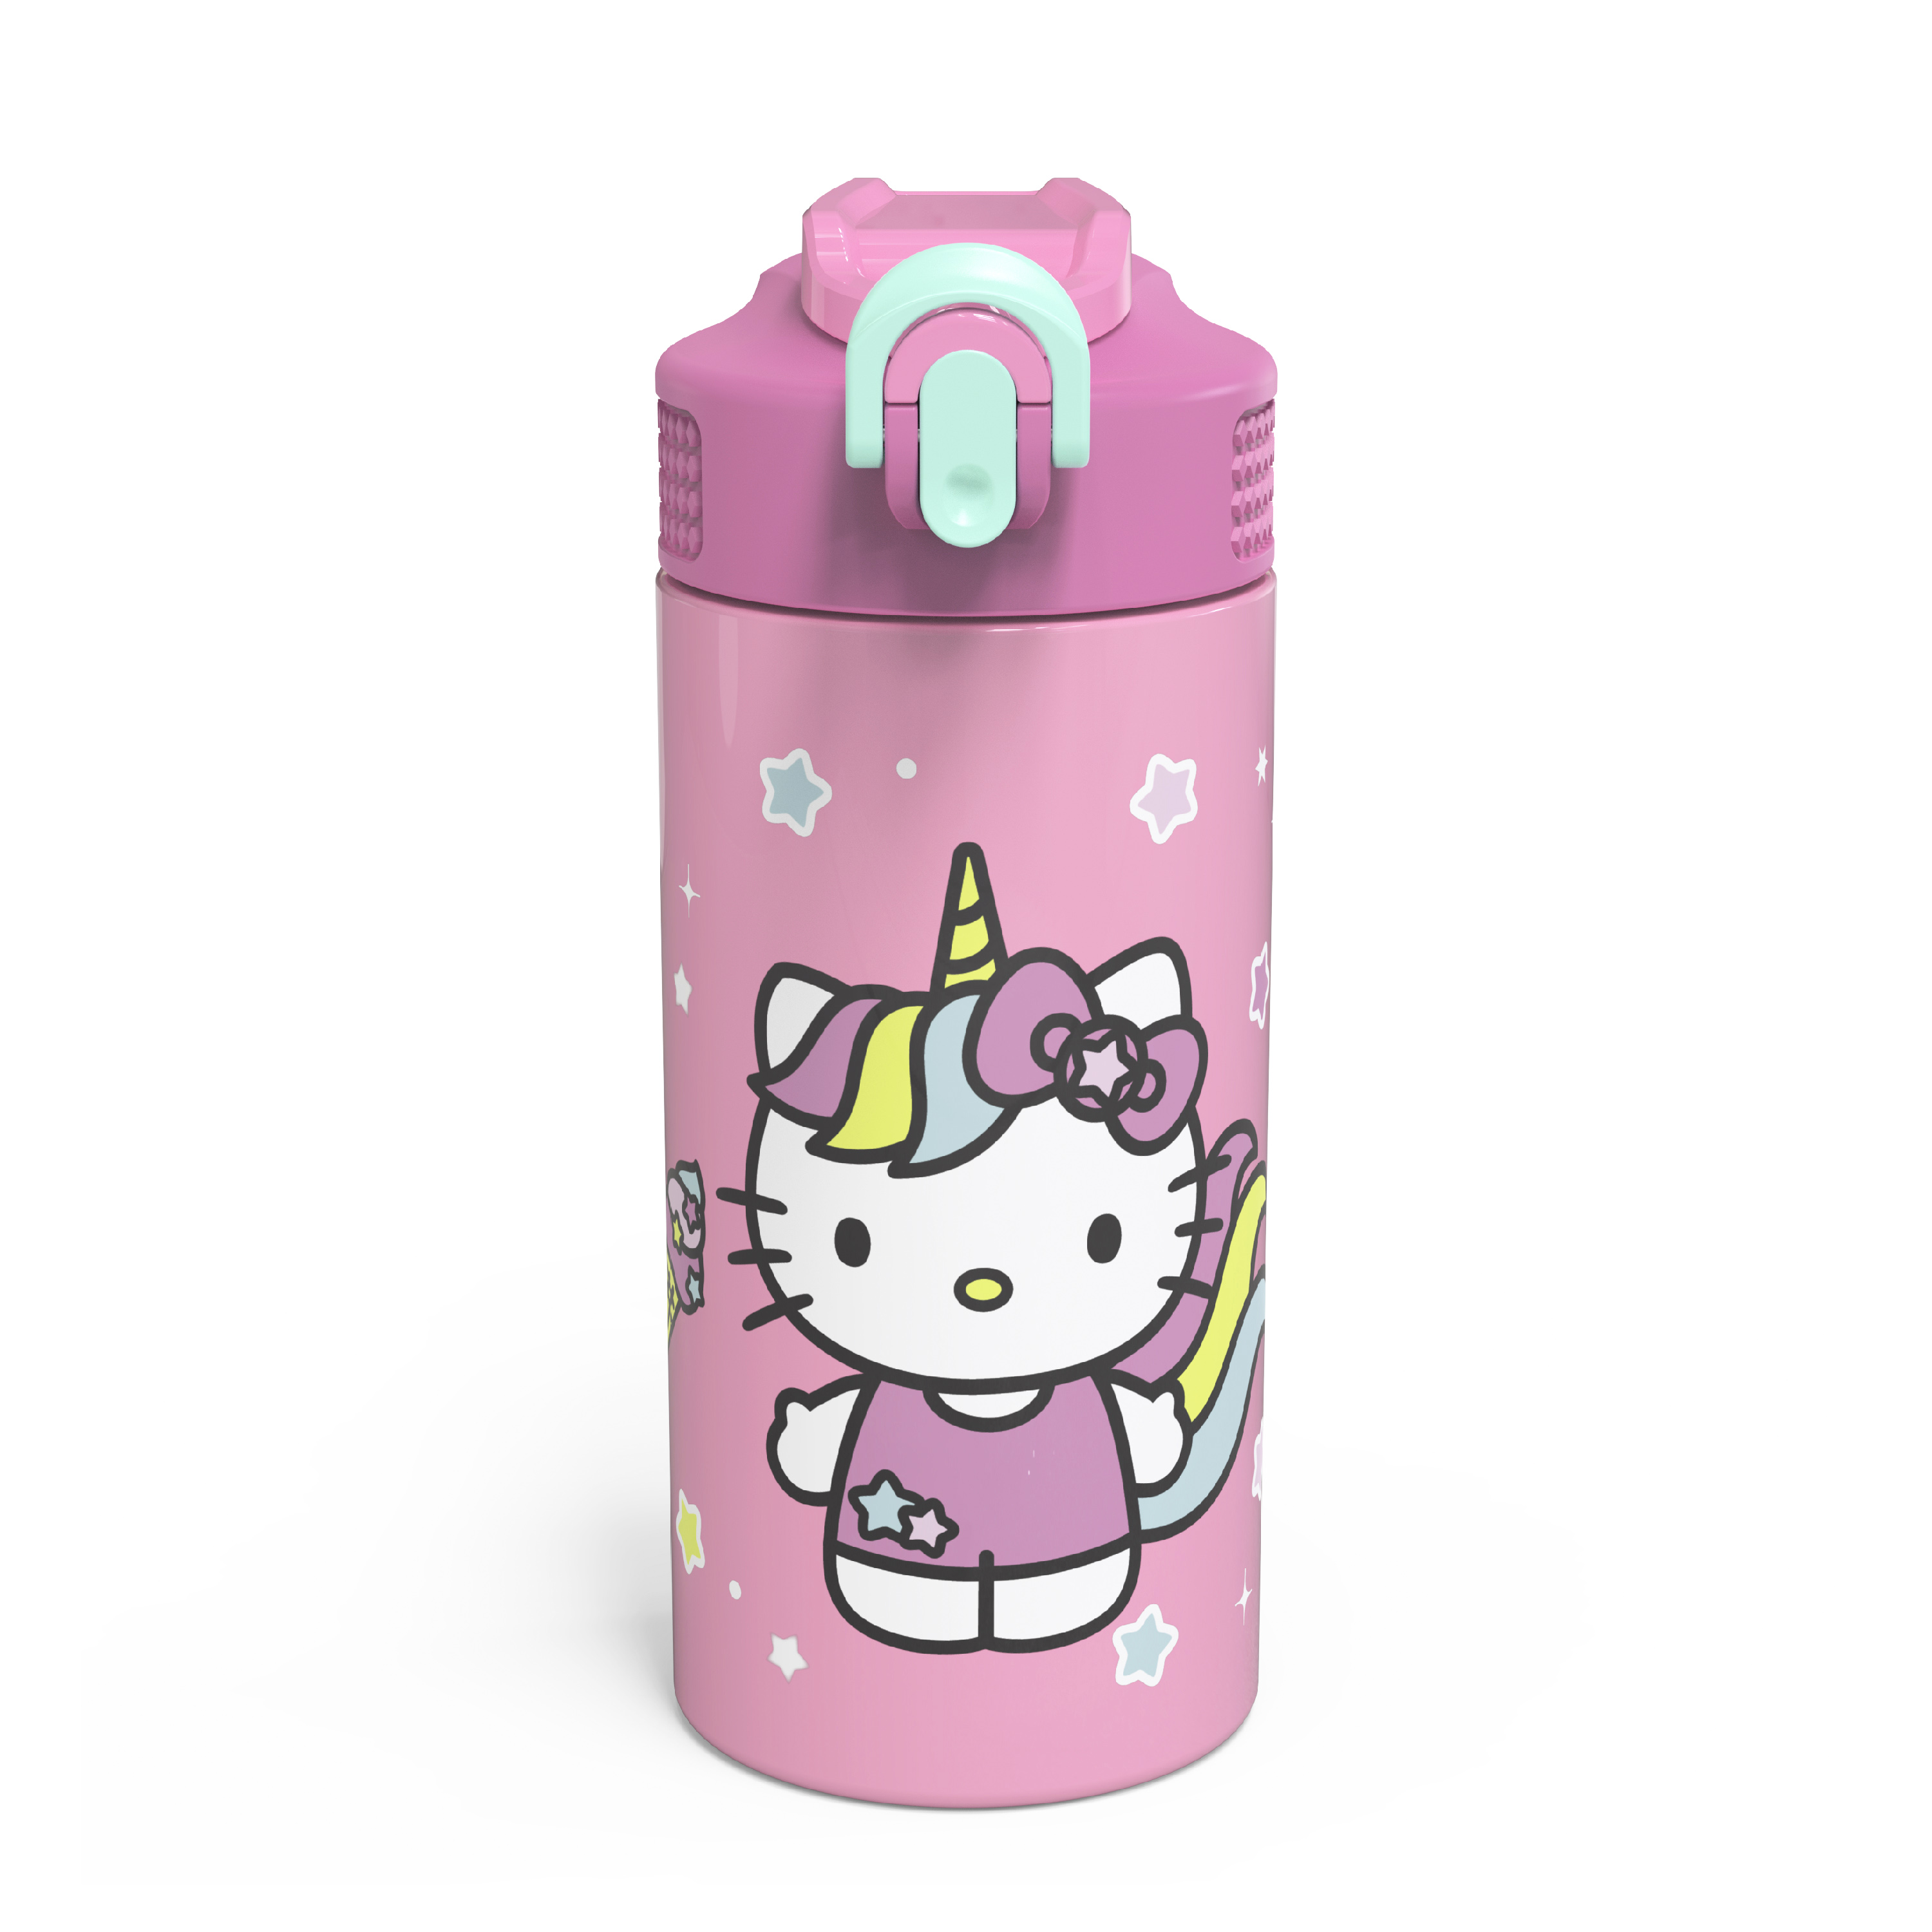 Sanrio 14 ounce Stainless Steel Vacuum Insulated Water Bottle, Hello Kitty slideshow image 1